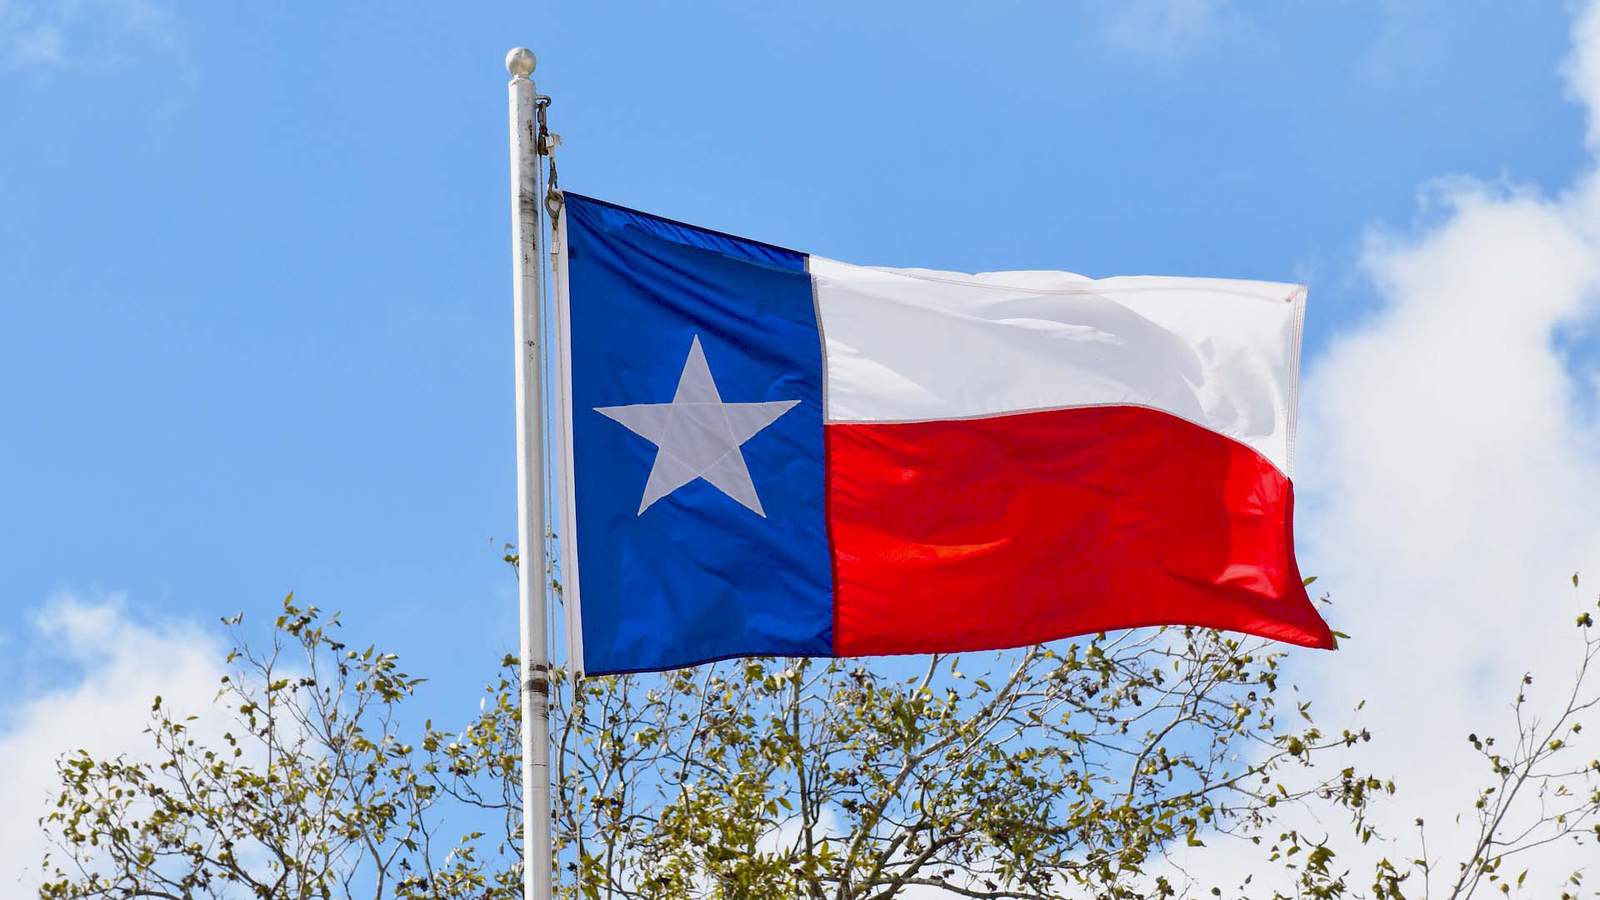 10 everyday items that are just better Texas-ified